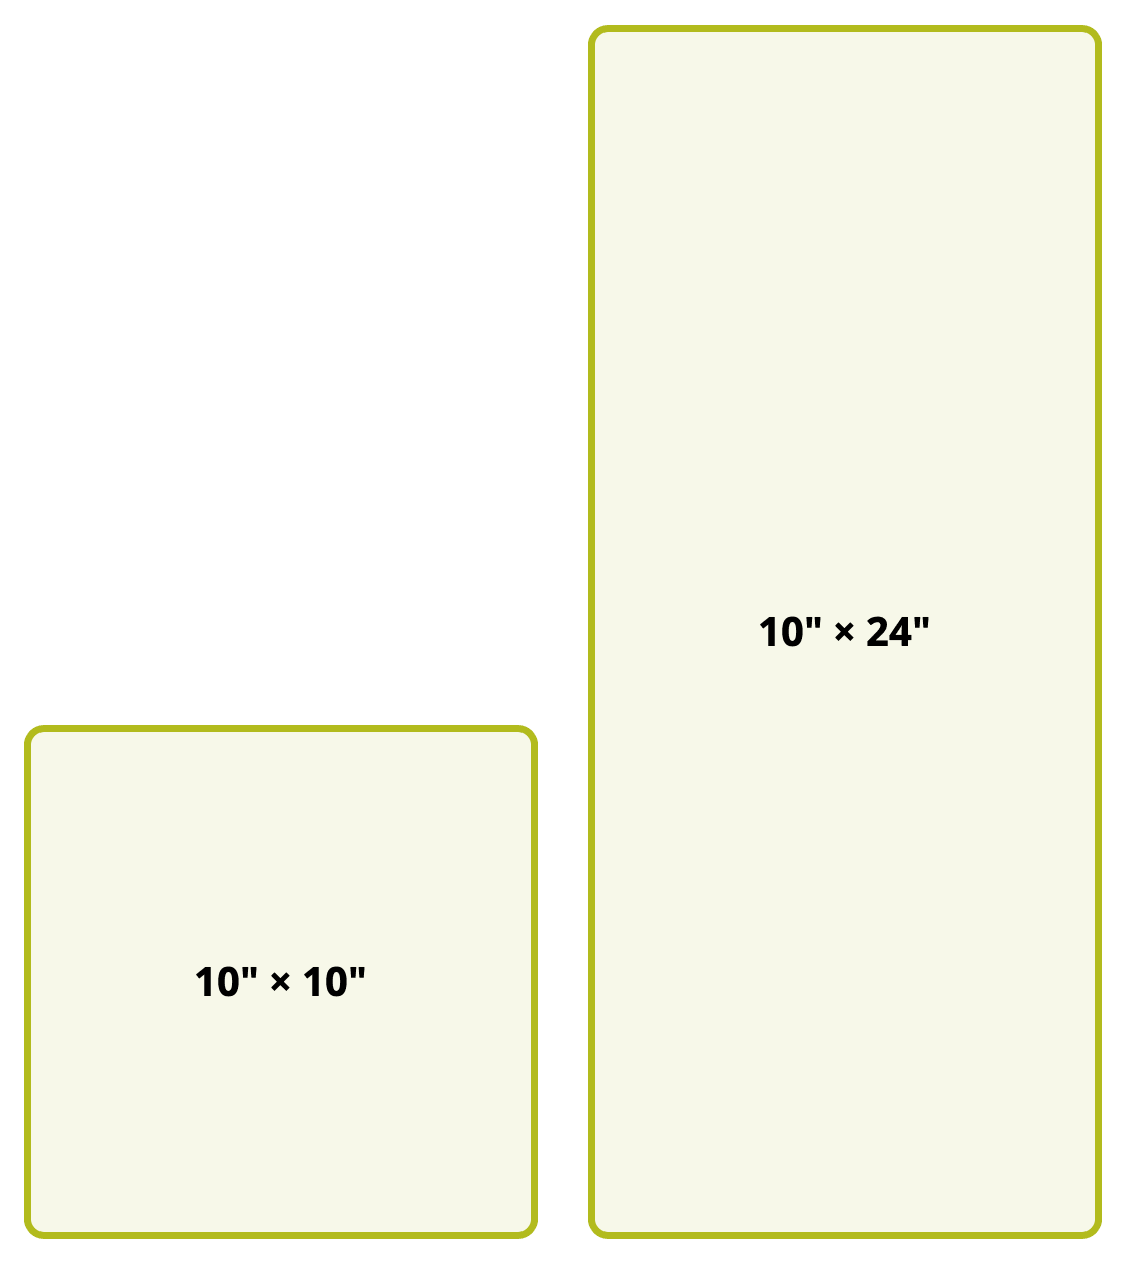 die sizes: 10" &times 10", 10" &times 24"